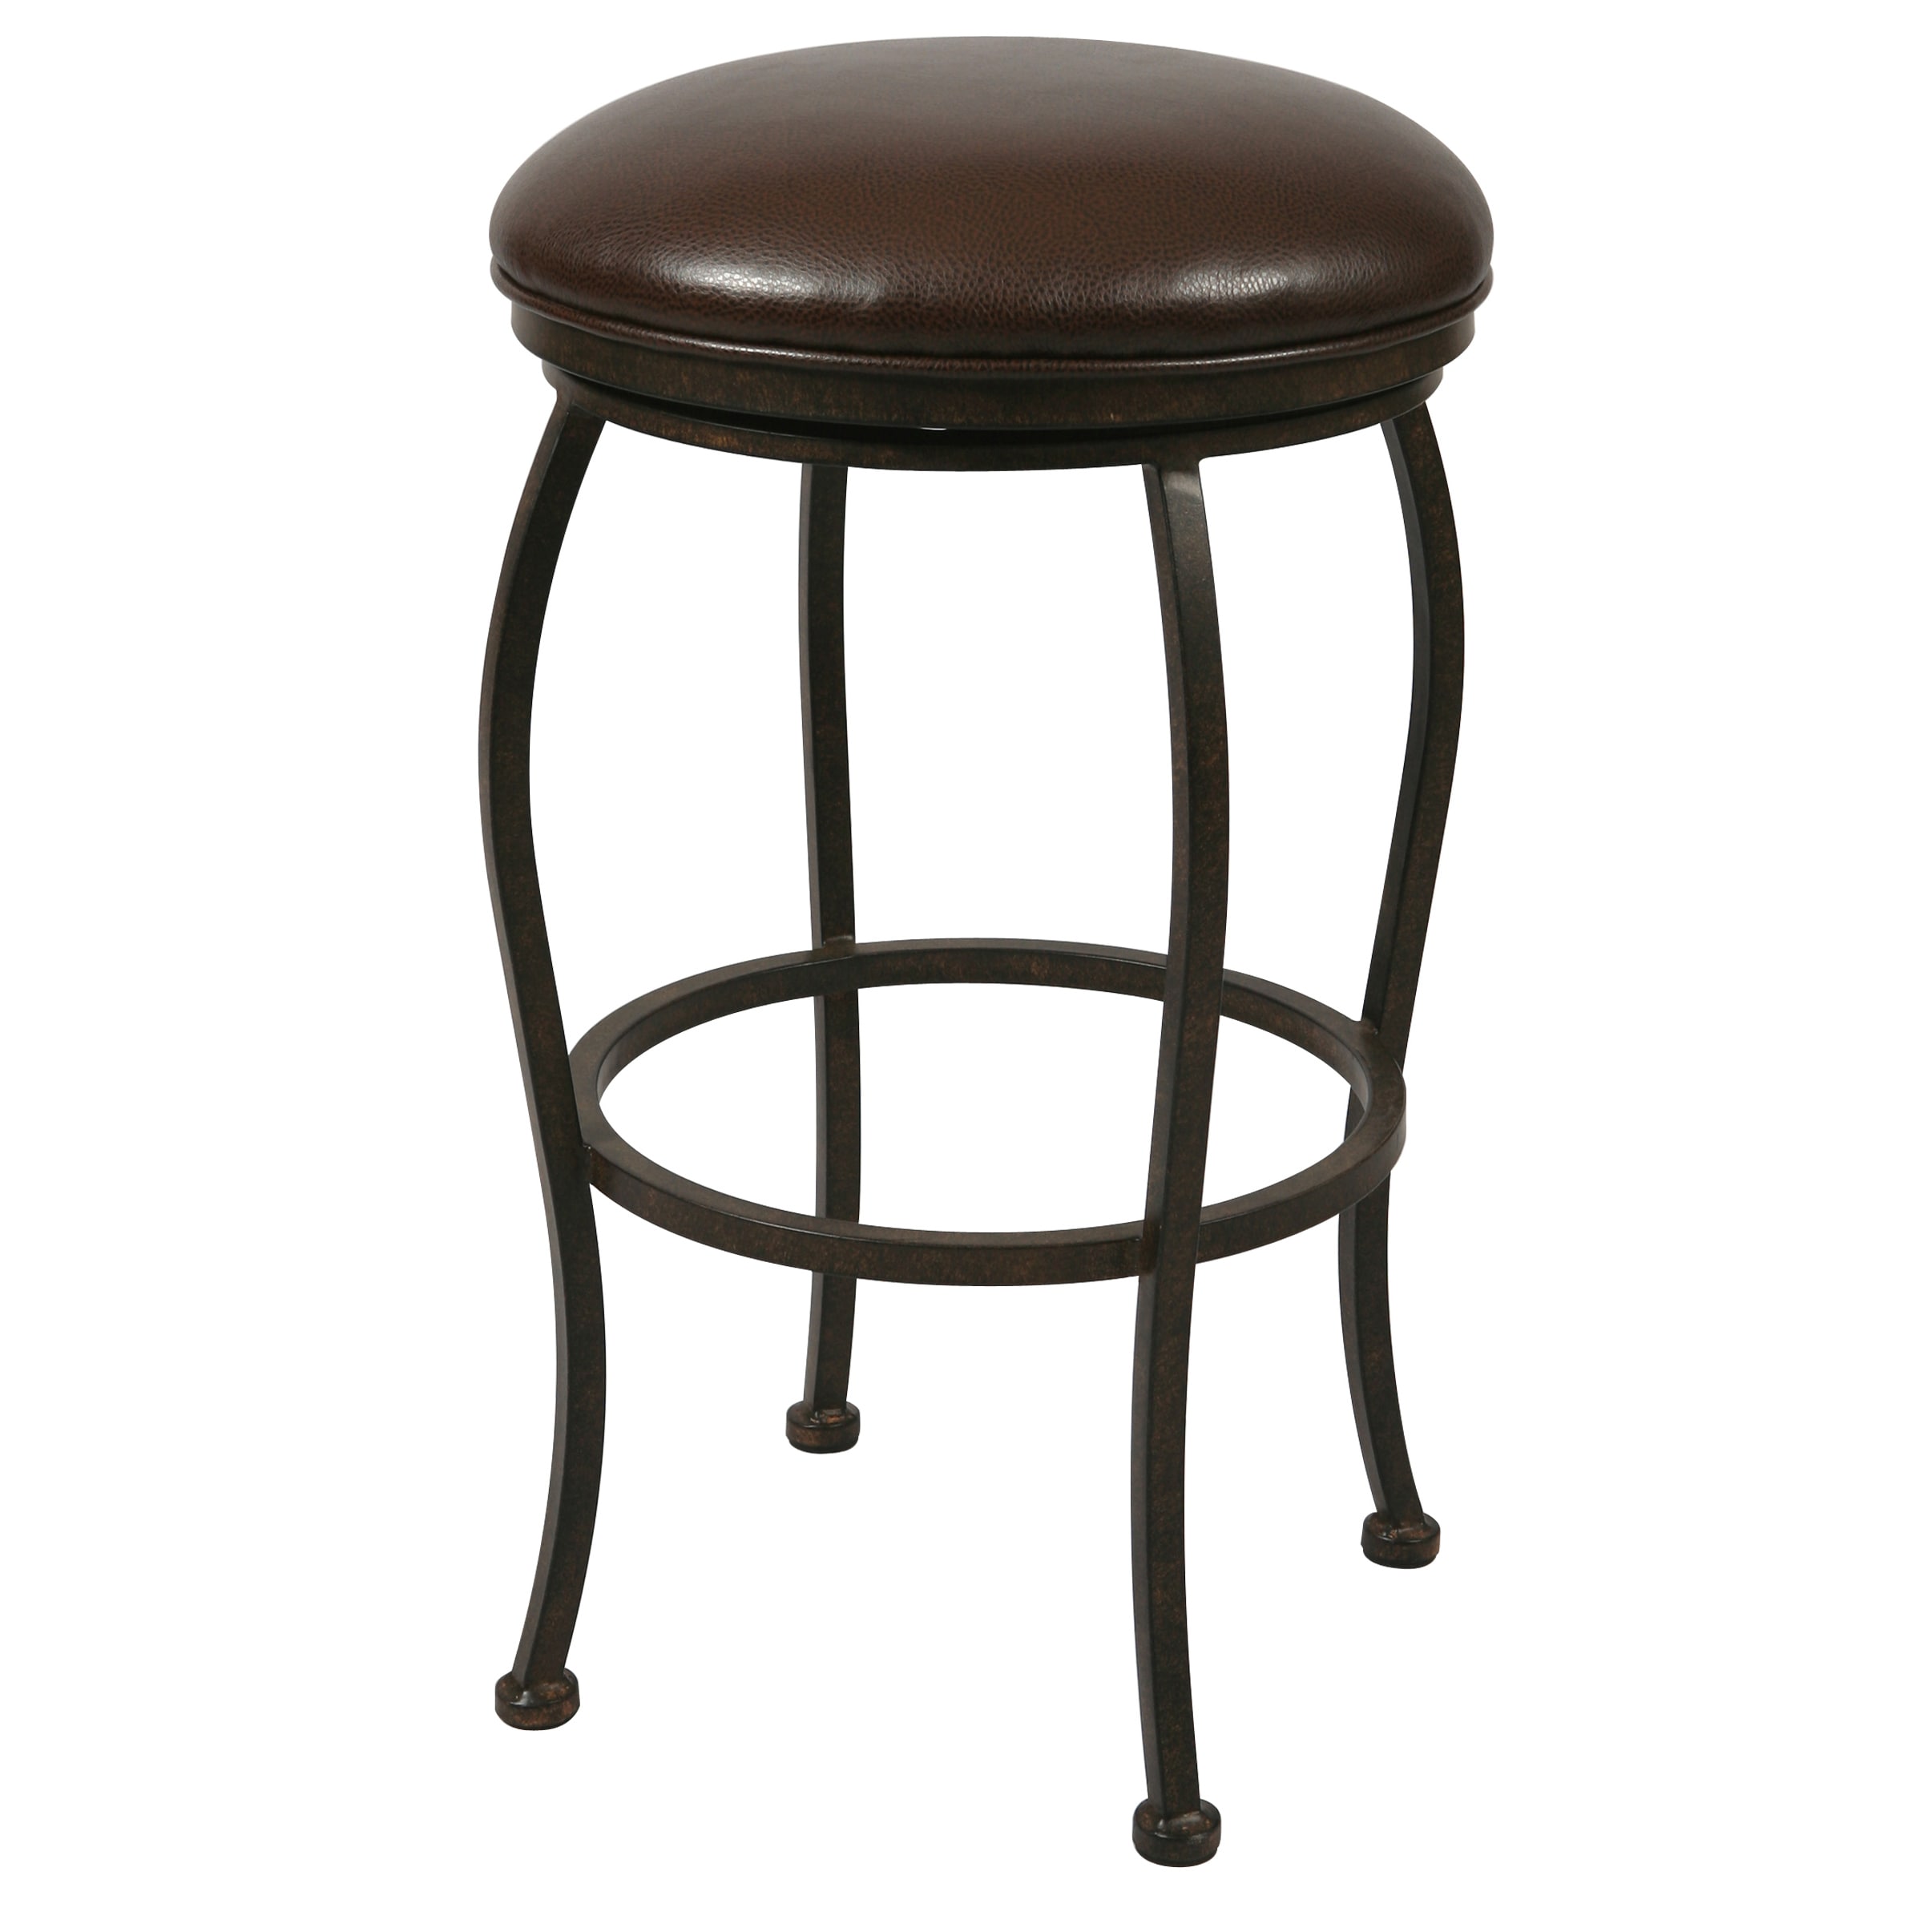 Top Backless Bar Stools of all time The ultimate guide | stoolz